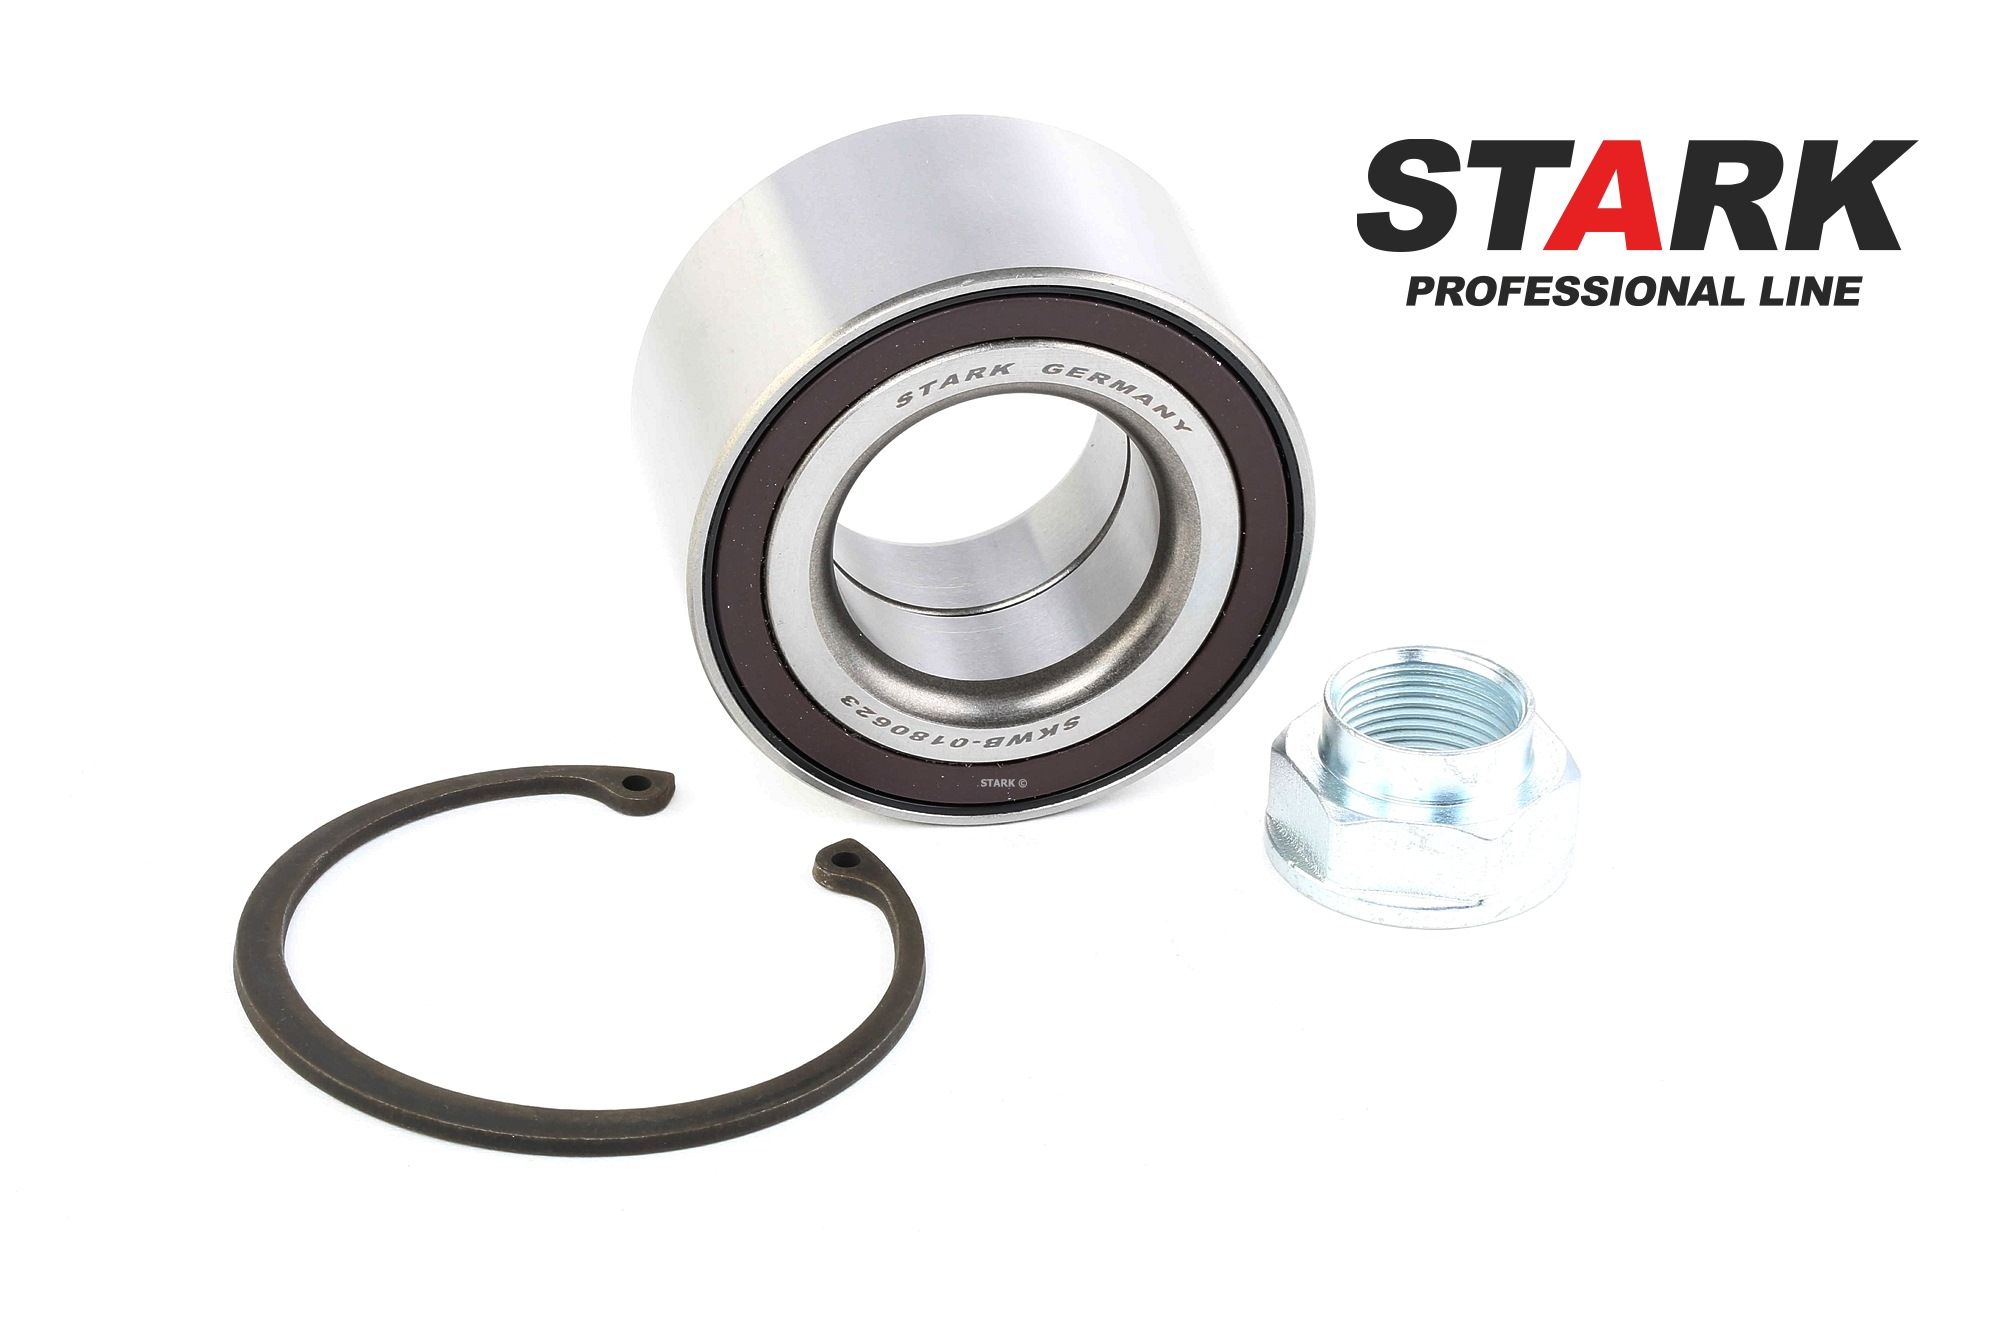 STARK SKWB-0180623 Wheel bearing kit Rear Axle both sides, Front axle both sides, with integrated ABS sensor, 73 mm